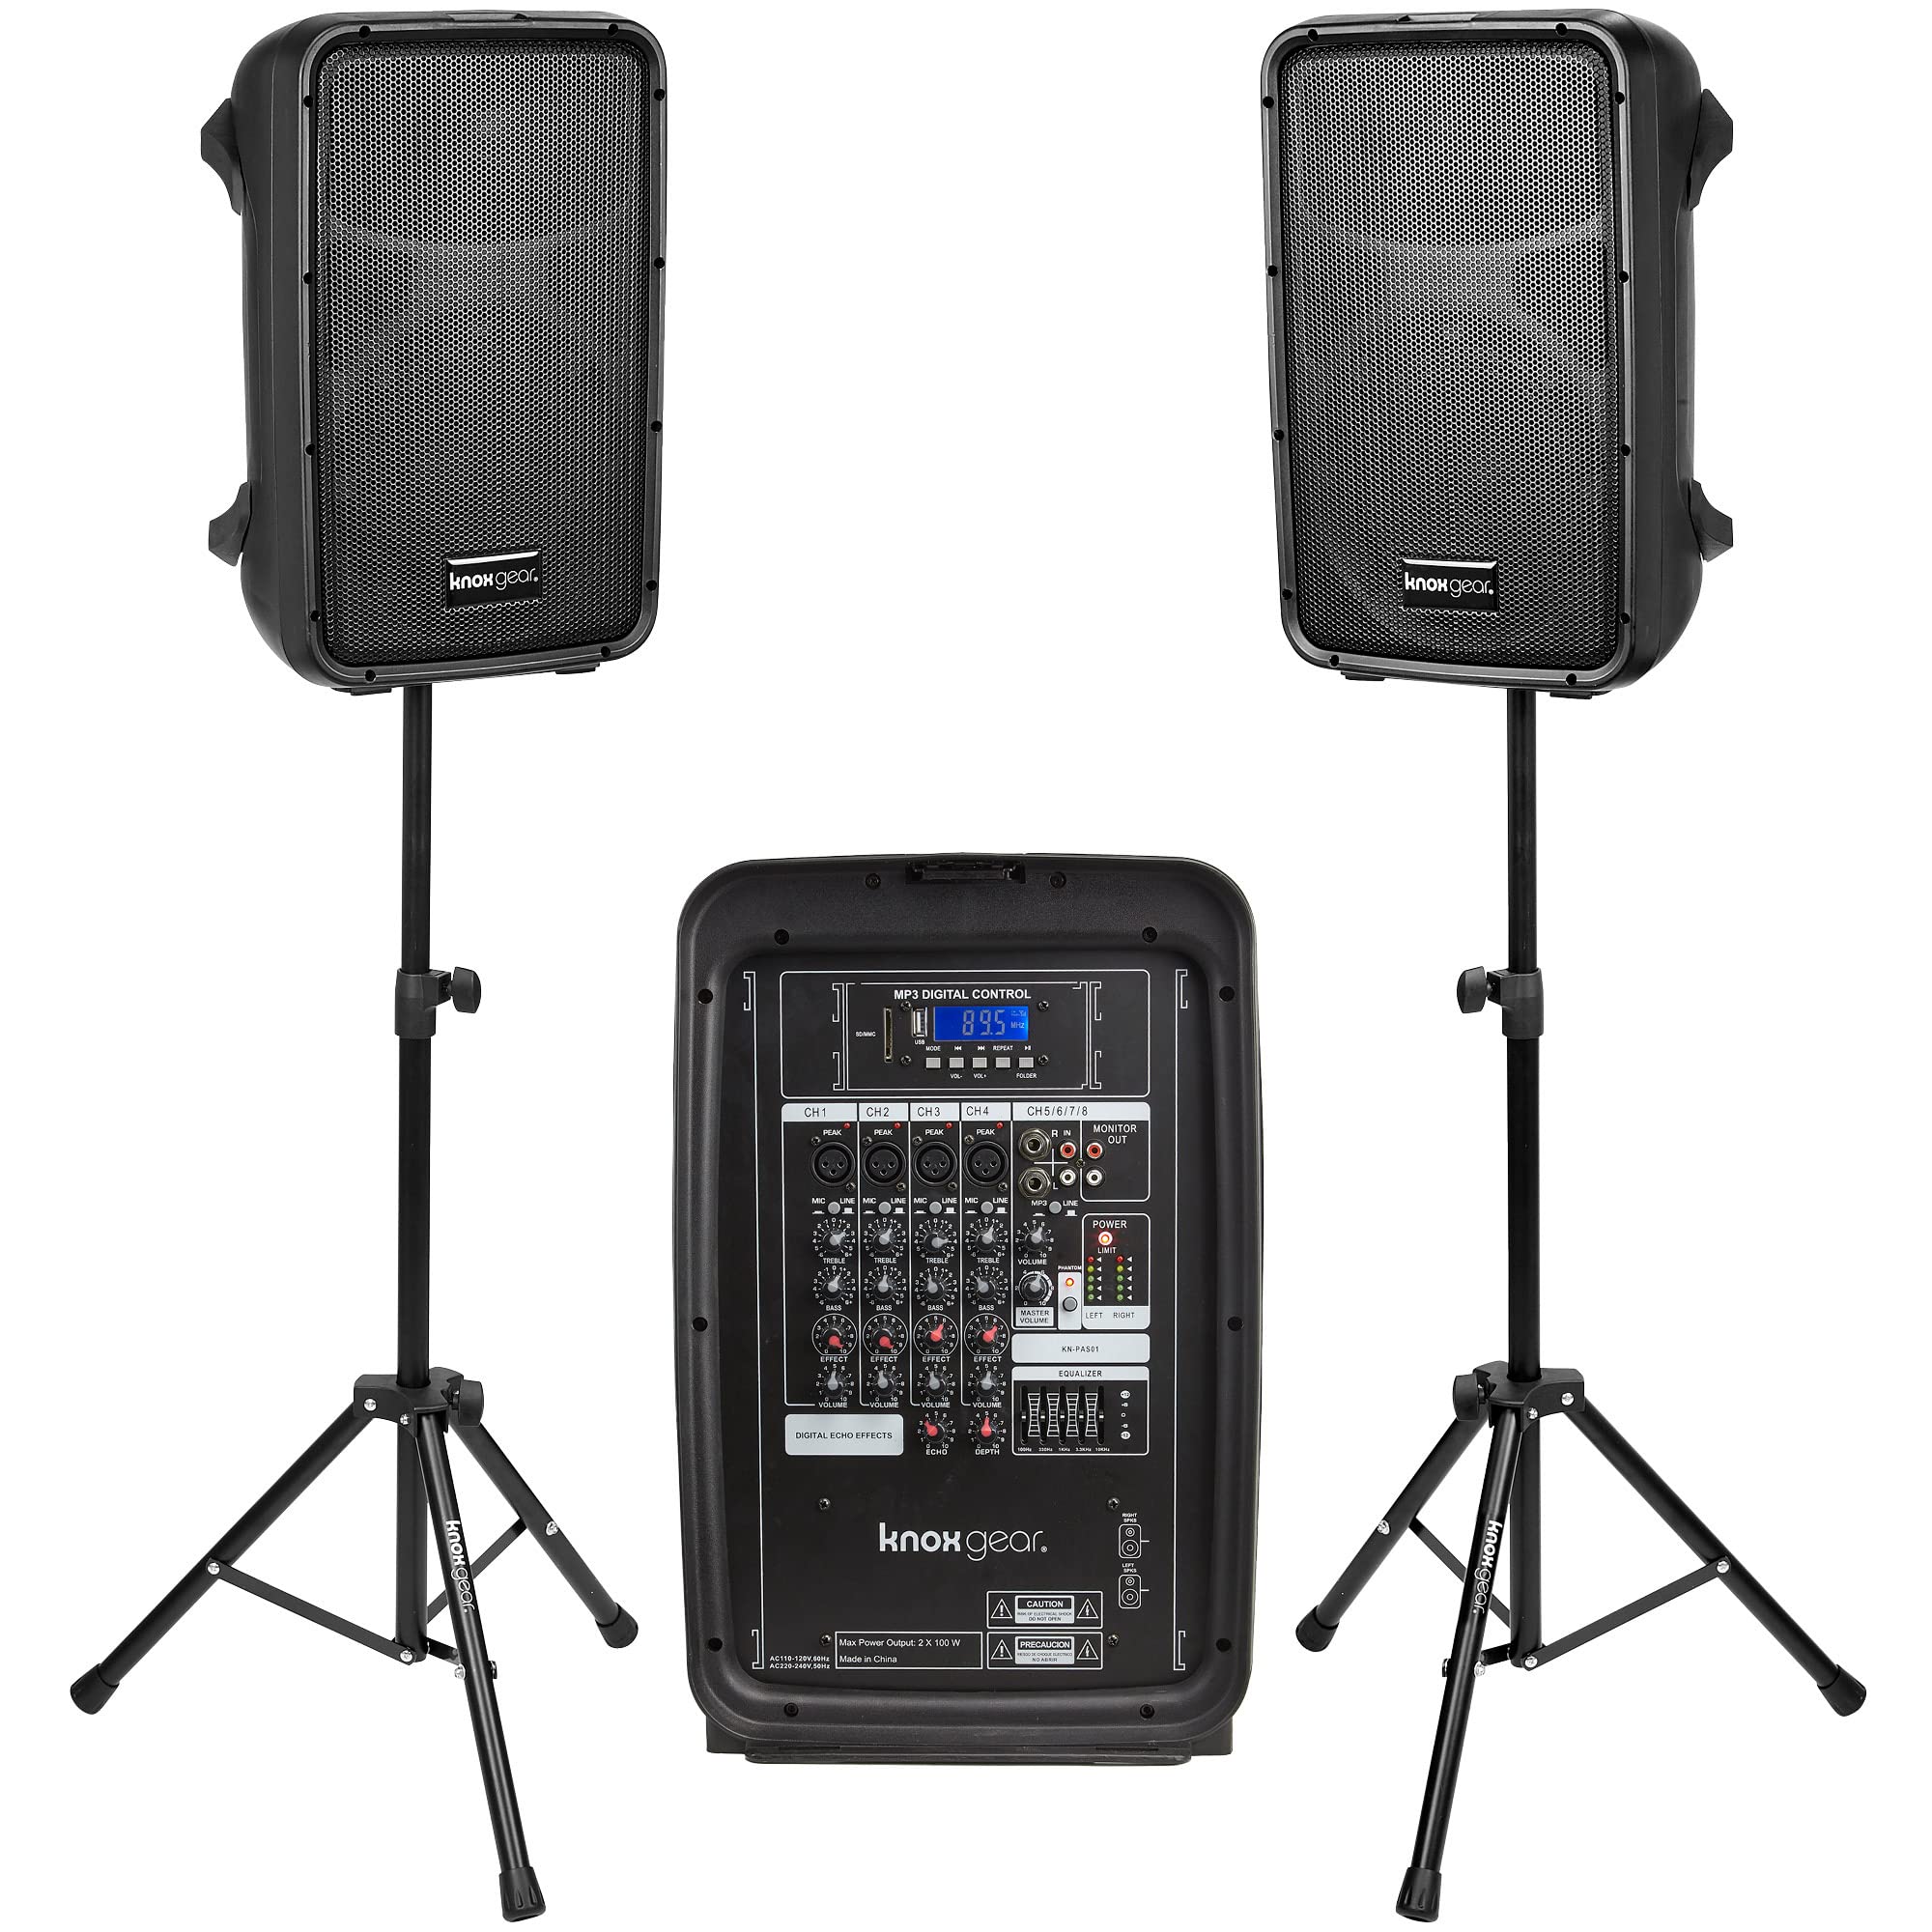  Knox Gear Knox Dual Speaker and Mixer Set–Portable 8” 300 Watt DJ PA System with Wired Microphone & Tripod Stands, 8 Channel Amplifier, Bluetooth, USB, SD, 1/4” Line RCA, XLR Inputs, Ideal for...